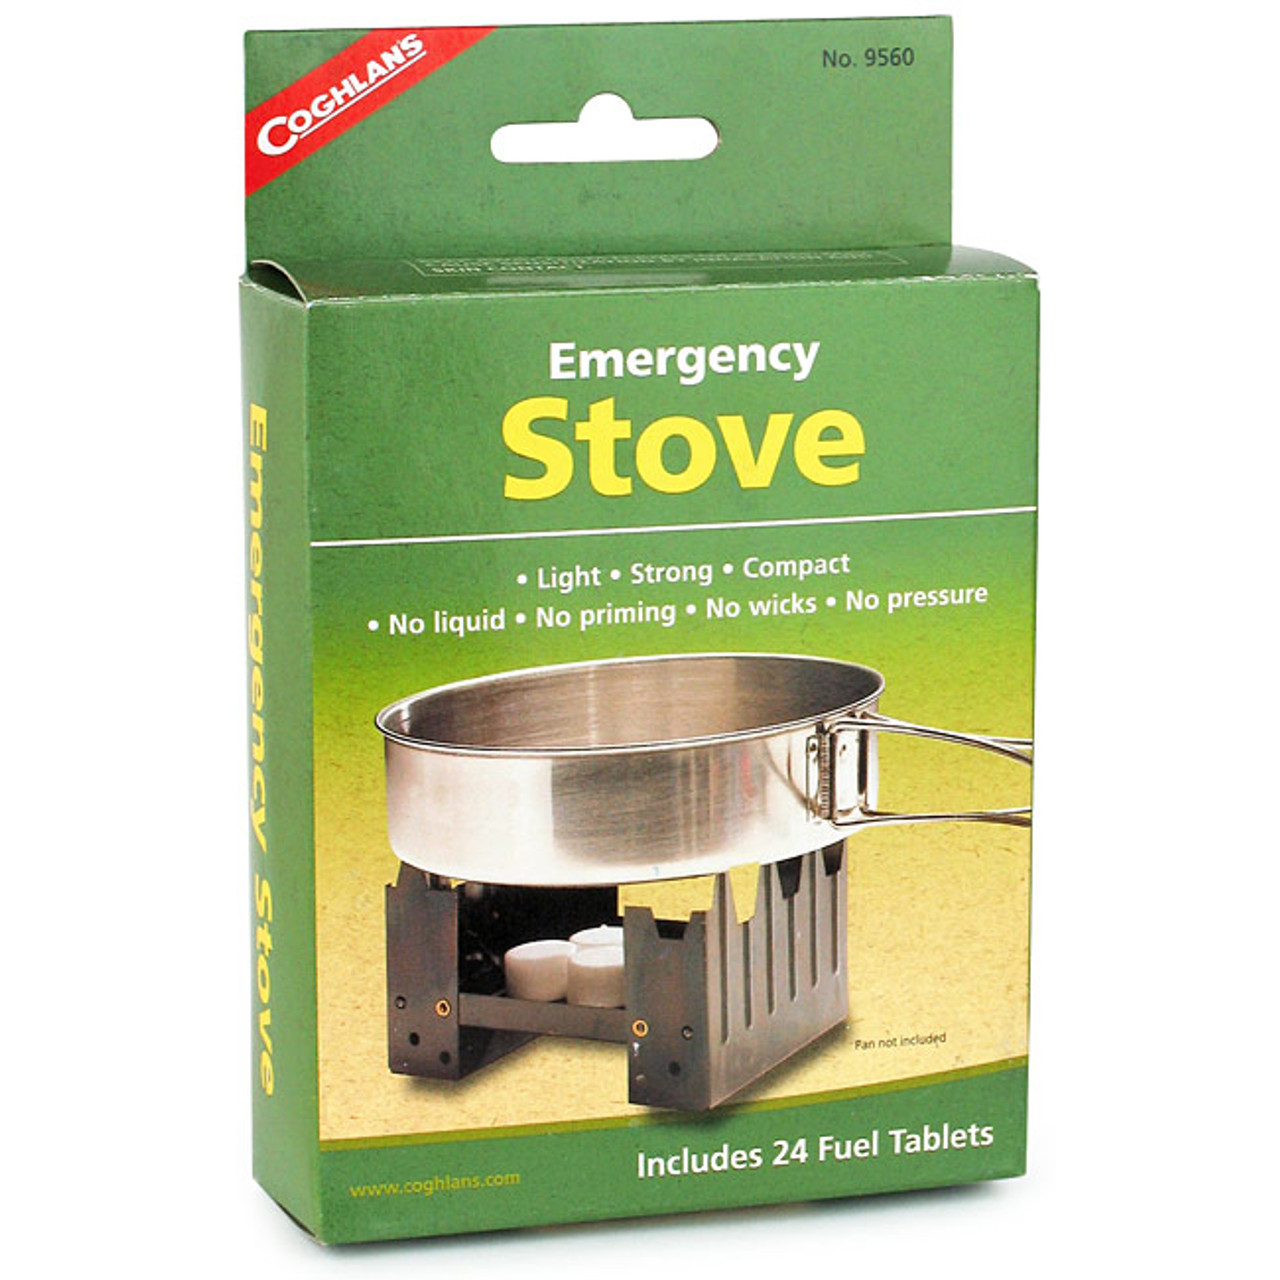 https://cdn11.bigcommerce.com/s-tumf4kk1l4/images/stencil/1280x1280/products/3958/7291/stansport-fold-up-backpacker-s-emergency-stove-with-24-fuel-tablets-17__17454.1640717340.jpg?c=1?imbypass=on